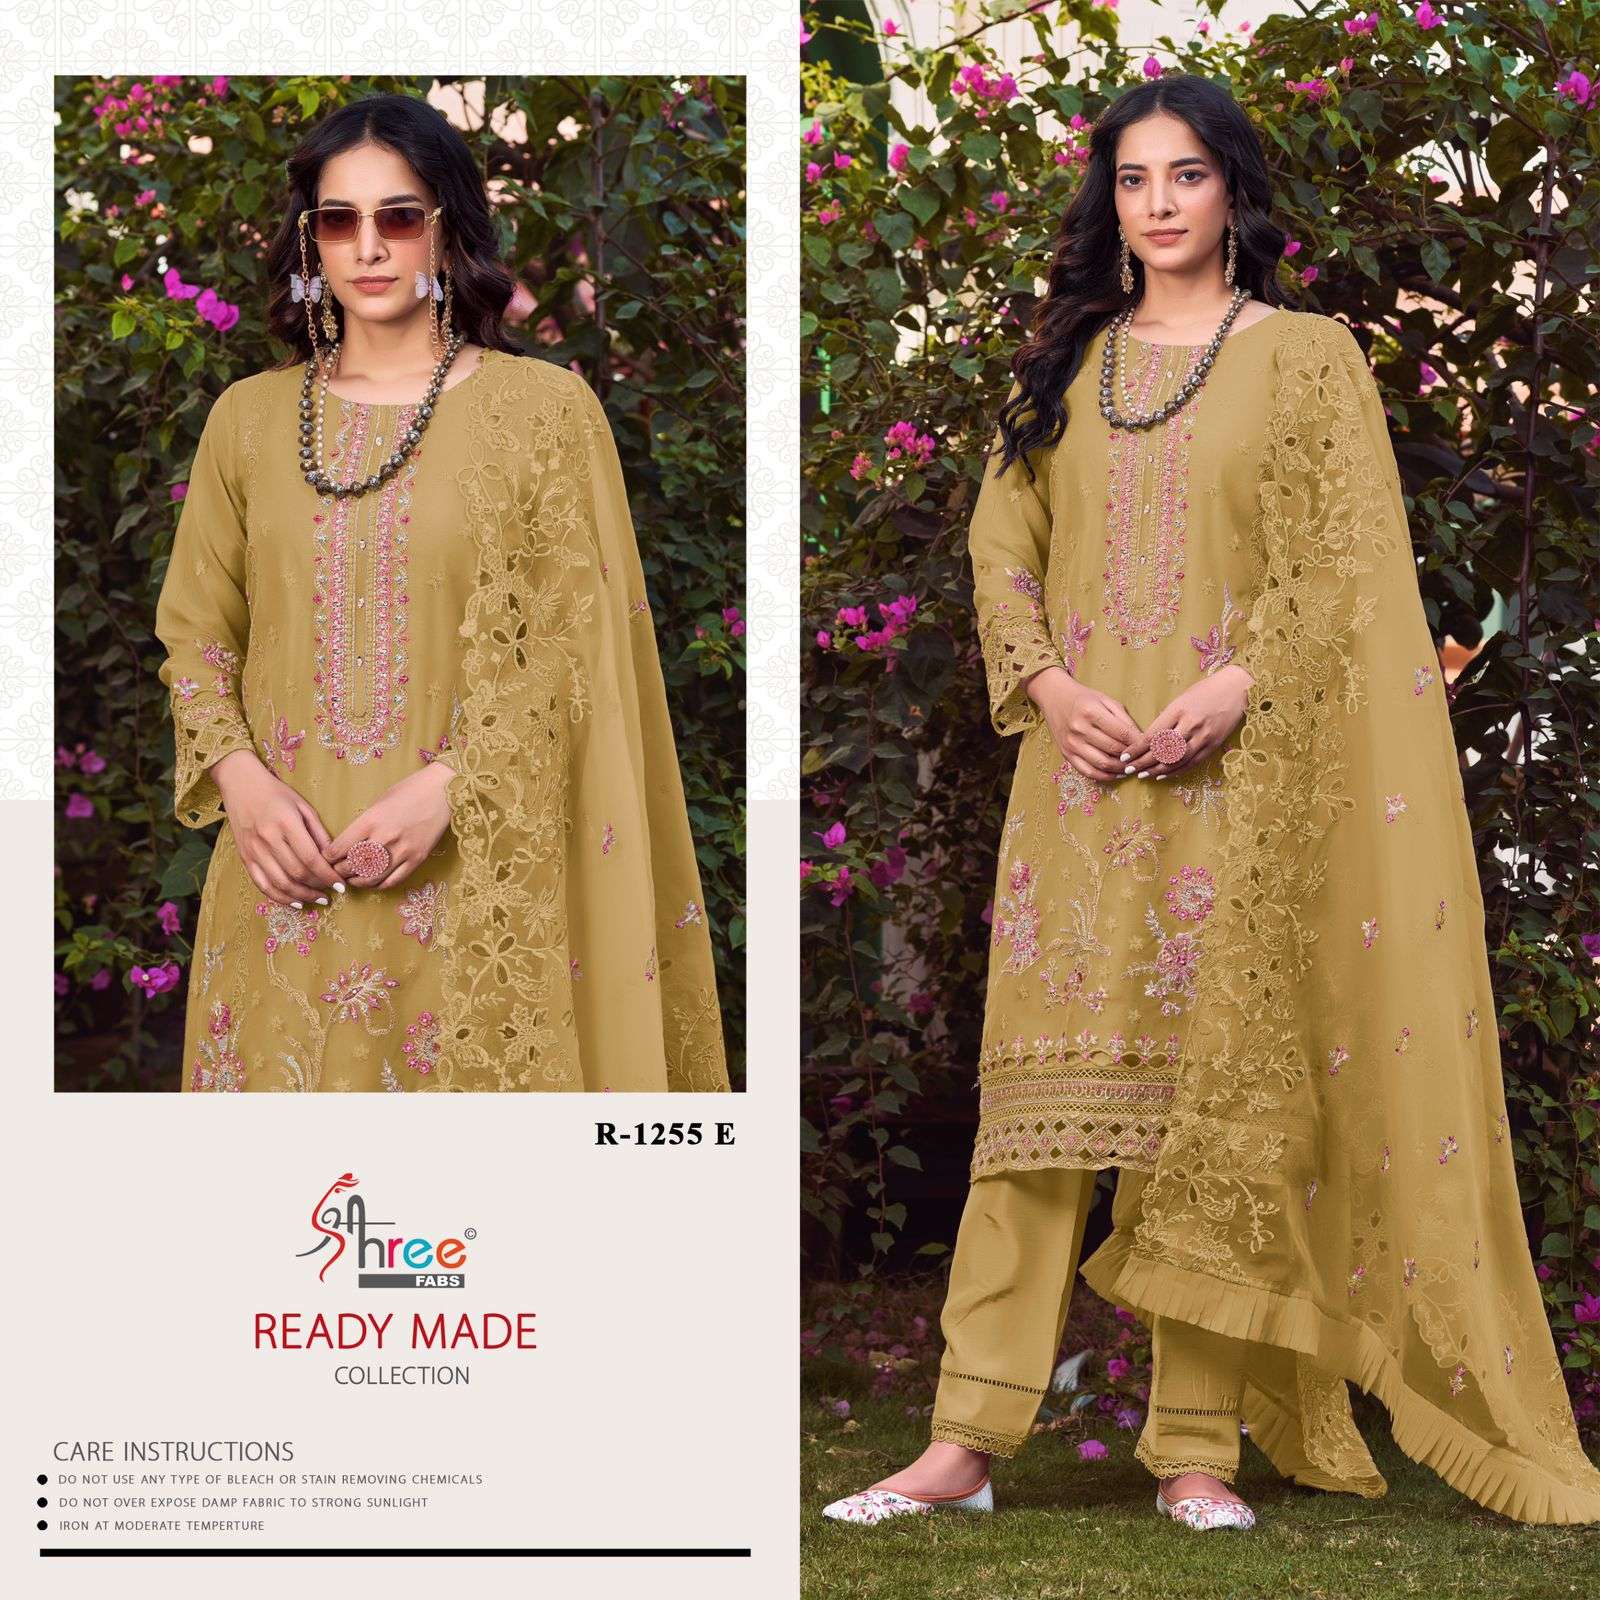 Shree Fabs R 1255 Colors Designer Pakistani Dress Readymade Collection